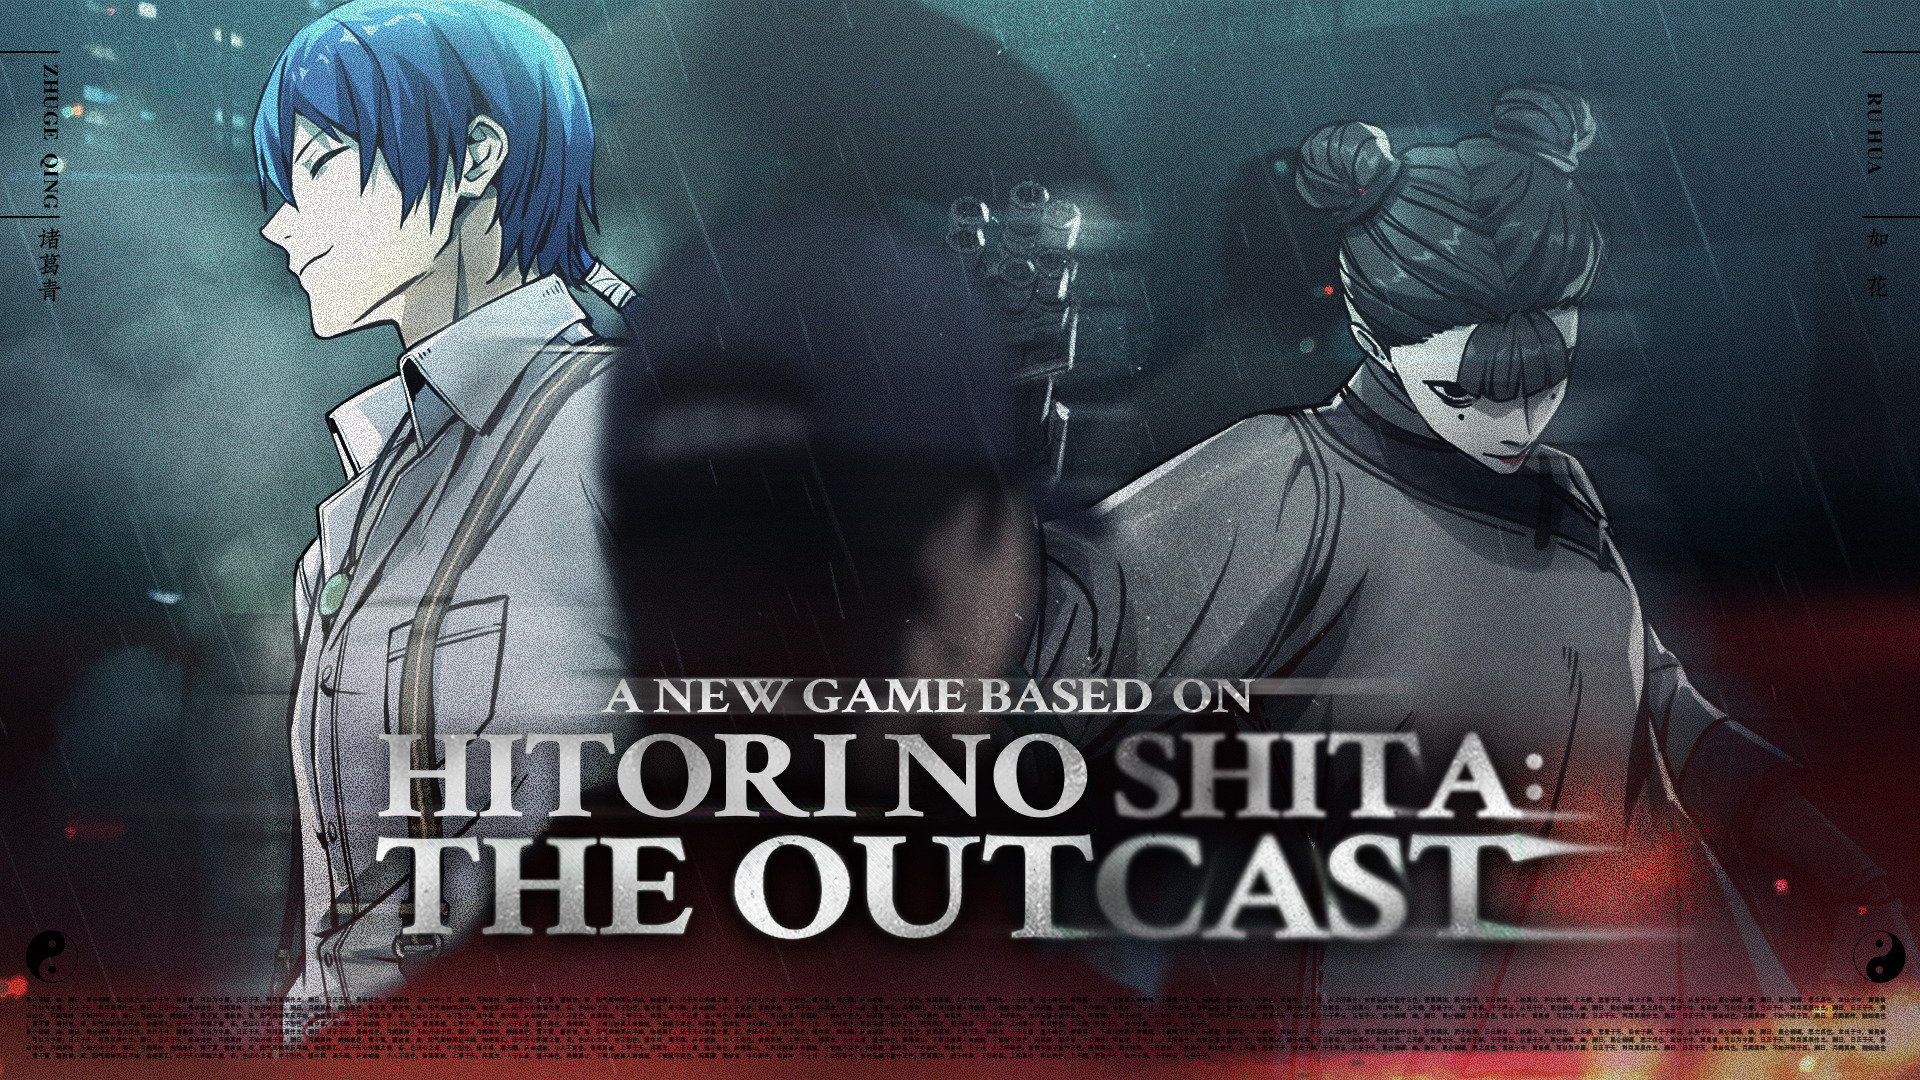 Hitori No Shita: Outcast-game voor iOS en Android is aangekondigd